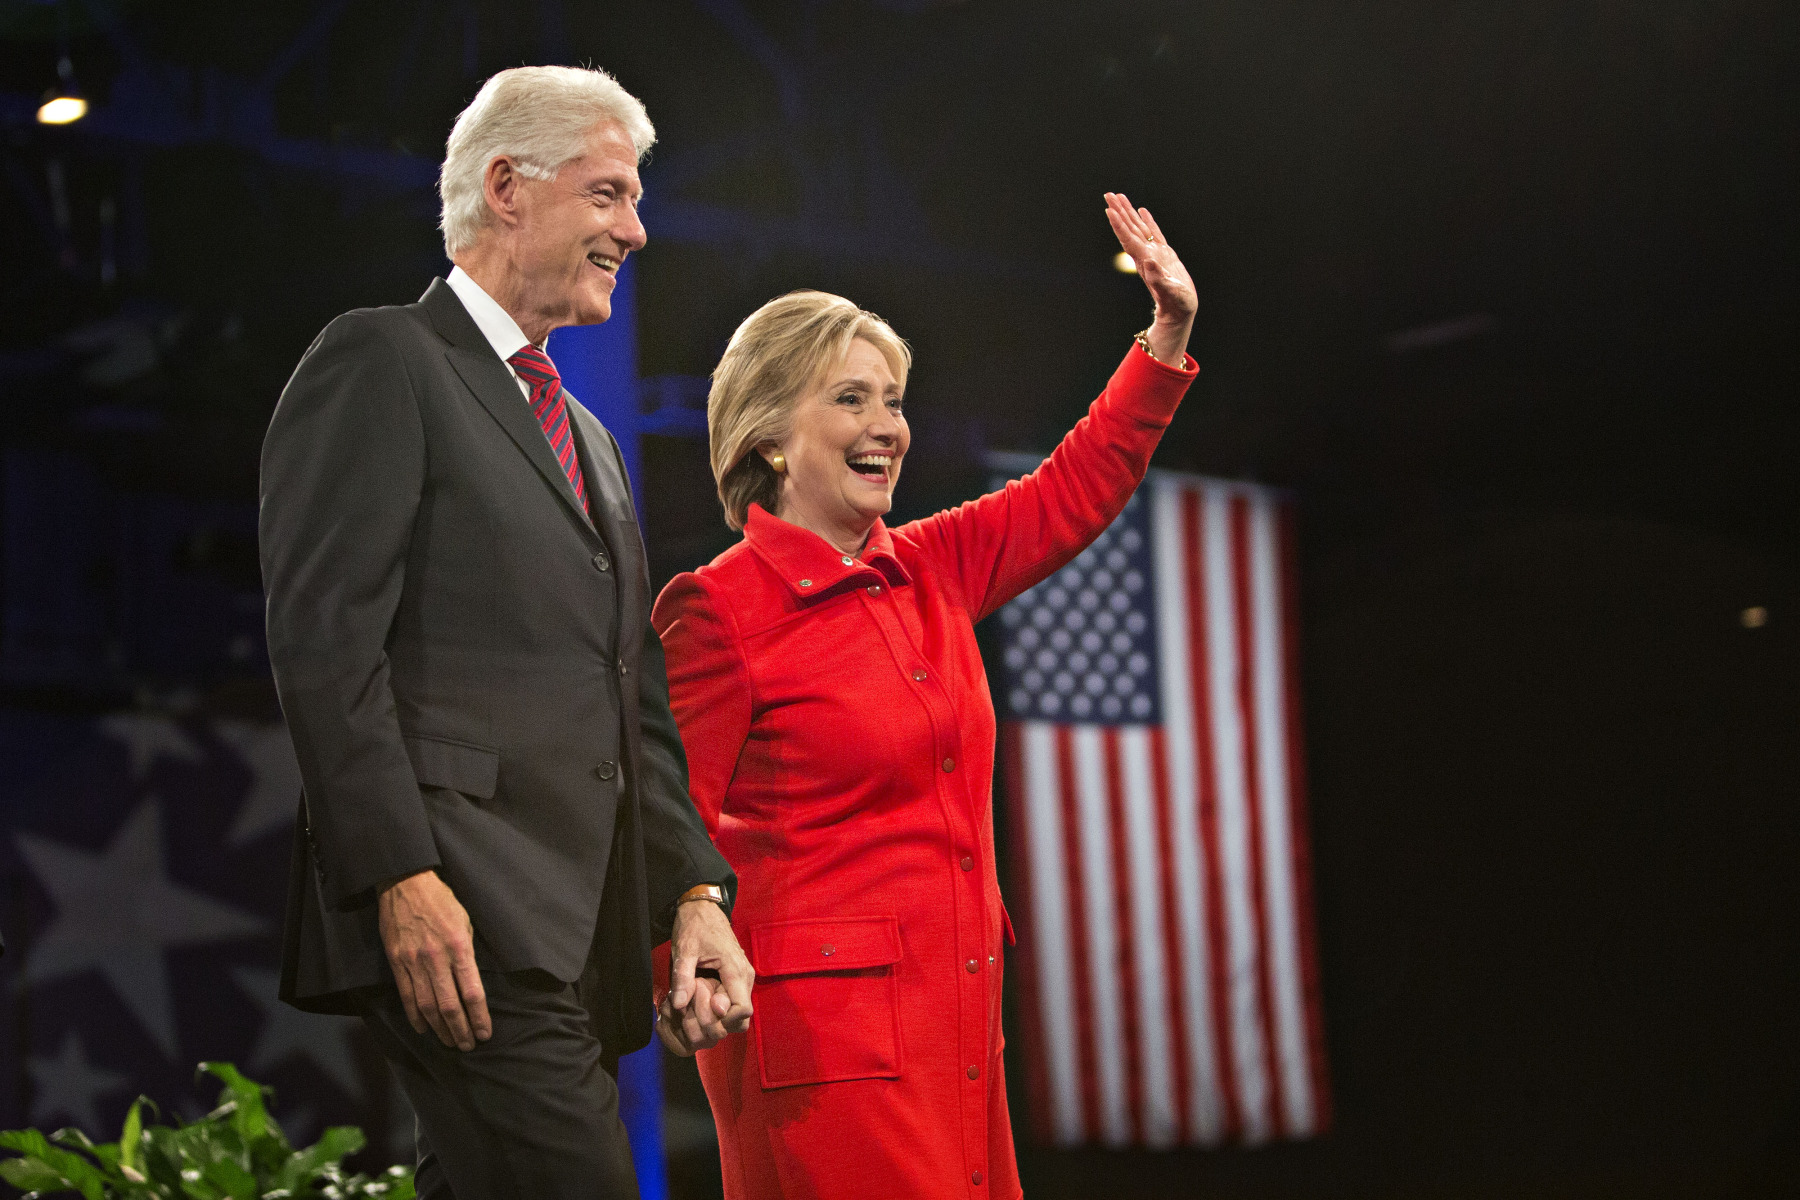 Hillary Clinton stands on stage with husband Bill Clinton at the conclusion of the Jefferson-Jackson Dinner in Des Moines, Iowa, on Oct. 24, 2015.
